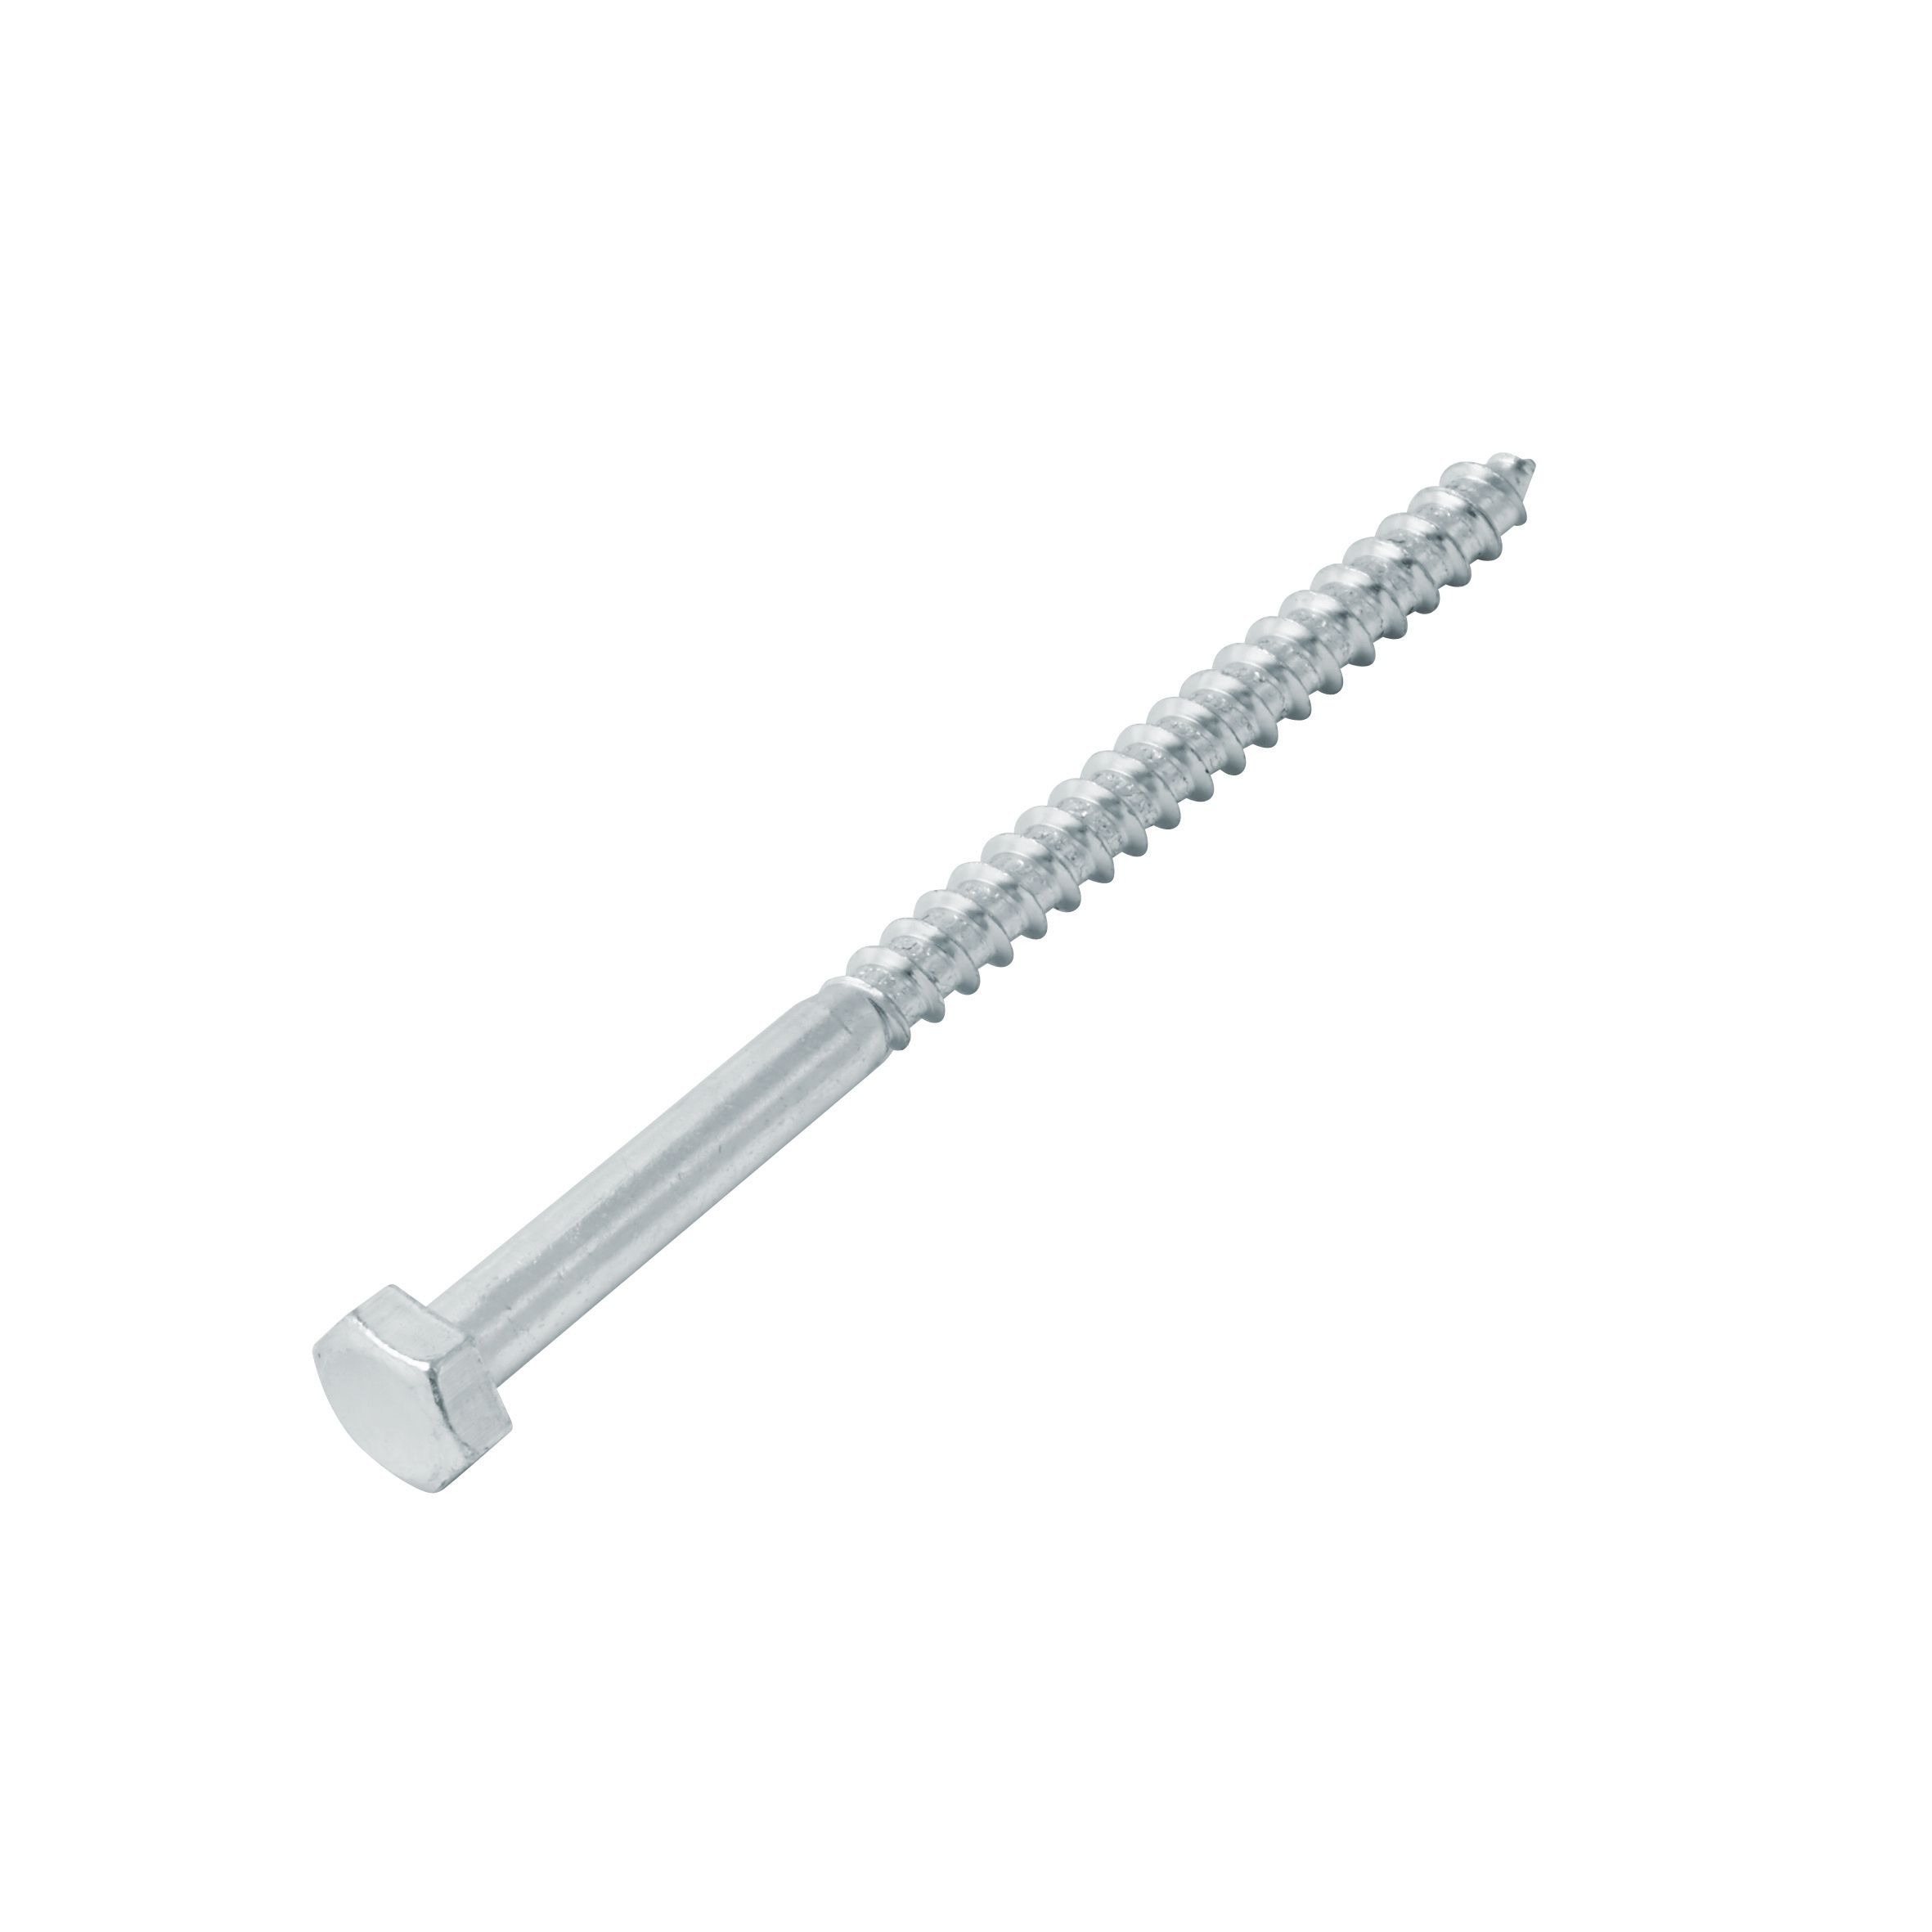 Image of Wickes Coach Screws - M8 x 100mm Pack of 8